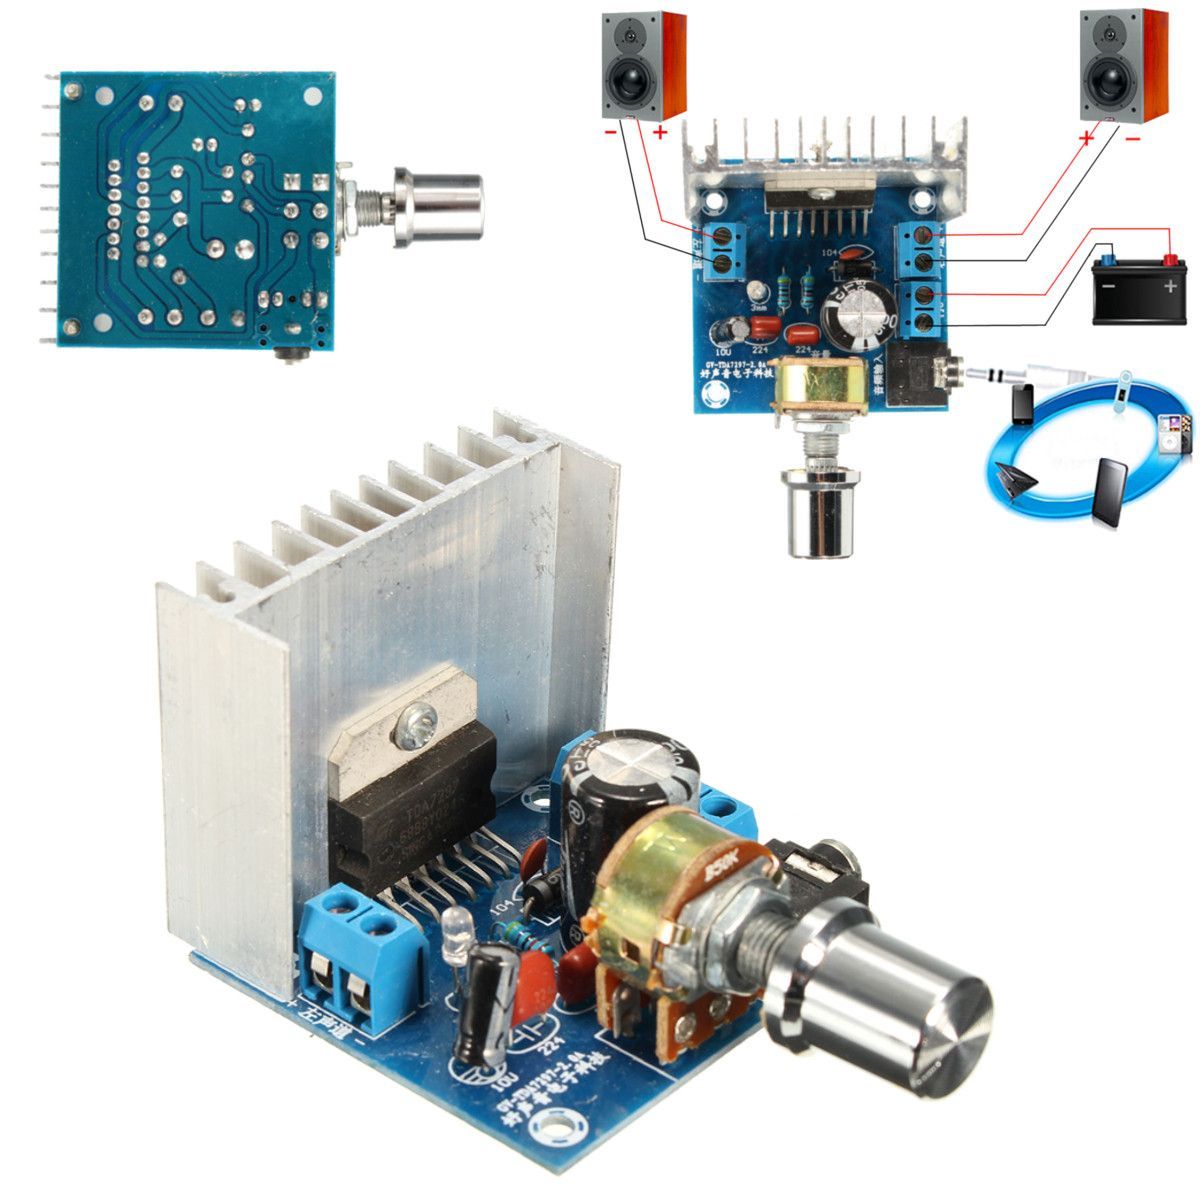 3Pcs-15W-TDA7297-Dual-Channel-Amplifier-Board-Geekcreit-for-Arduino---products-that-work-with-offici-1061374